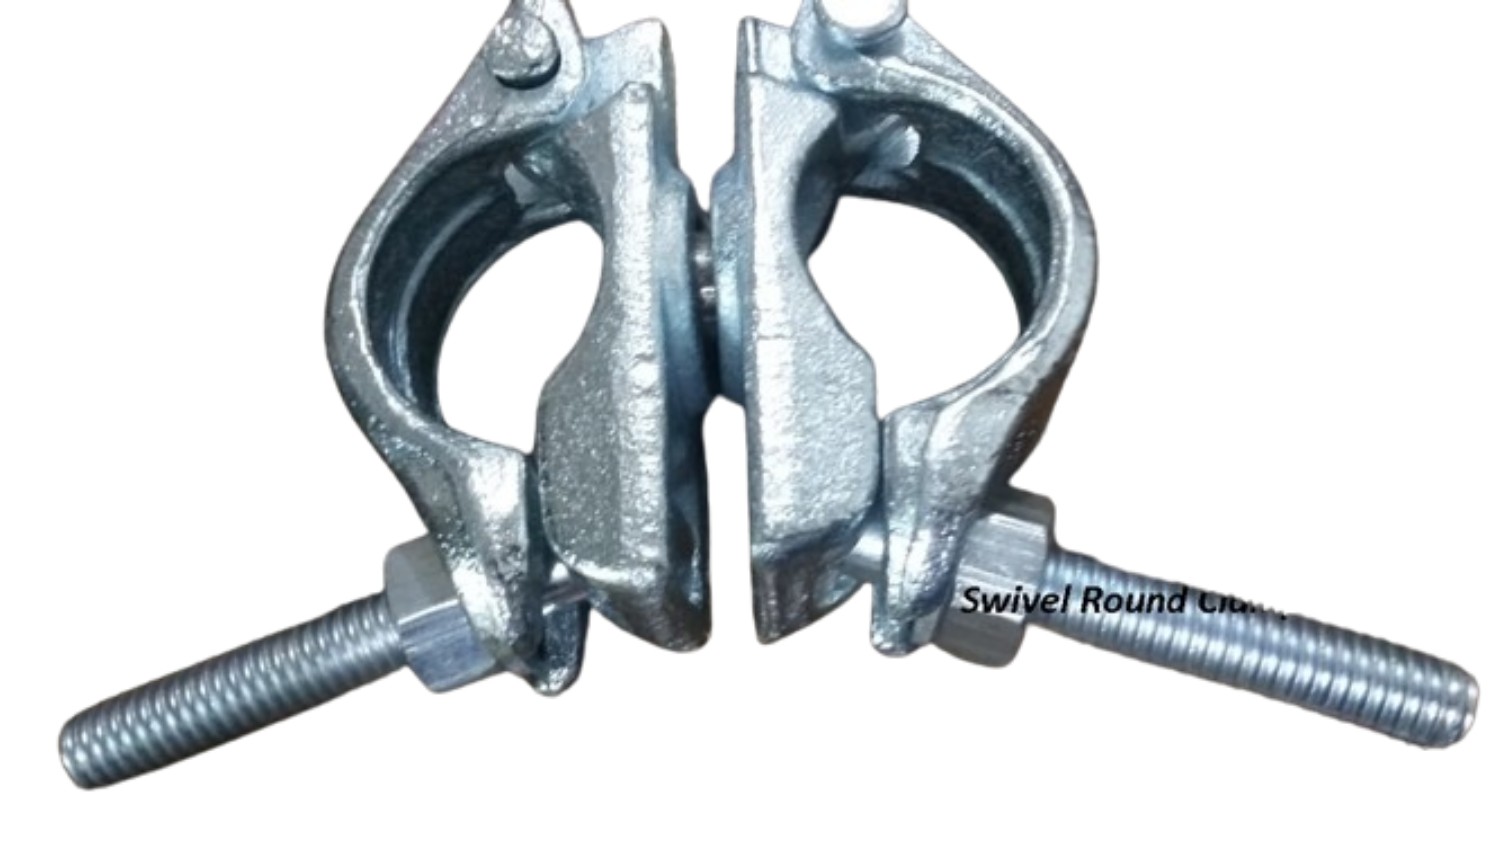 HP-CARBONSHIELD 40 x 40 mm Zinc Plated Forged Swivel Scaffolding Coupler 10 kN_0